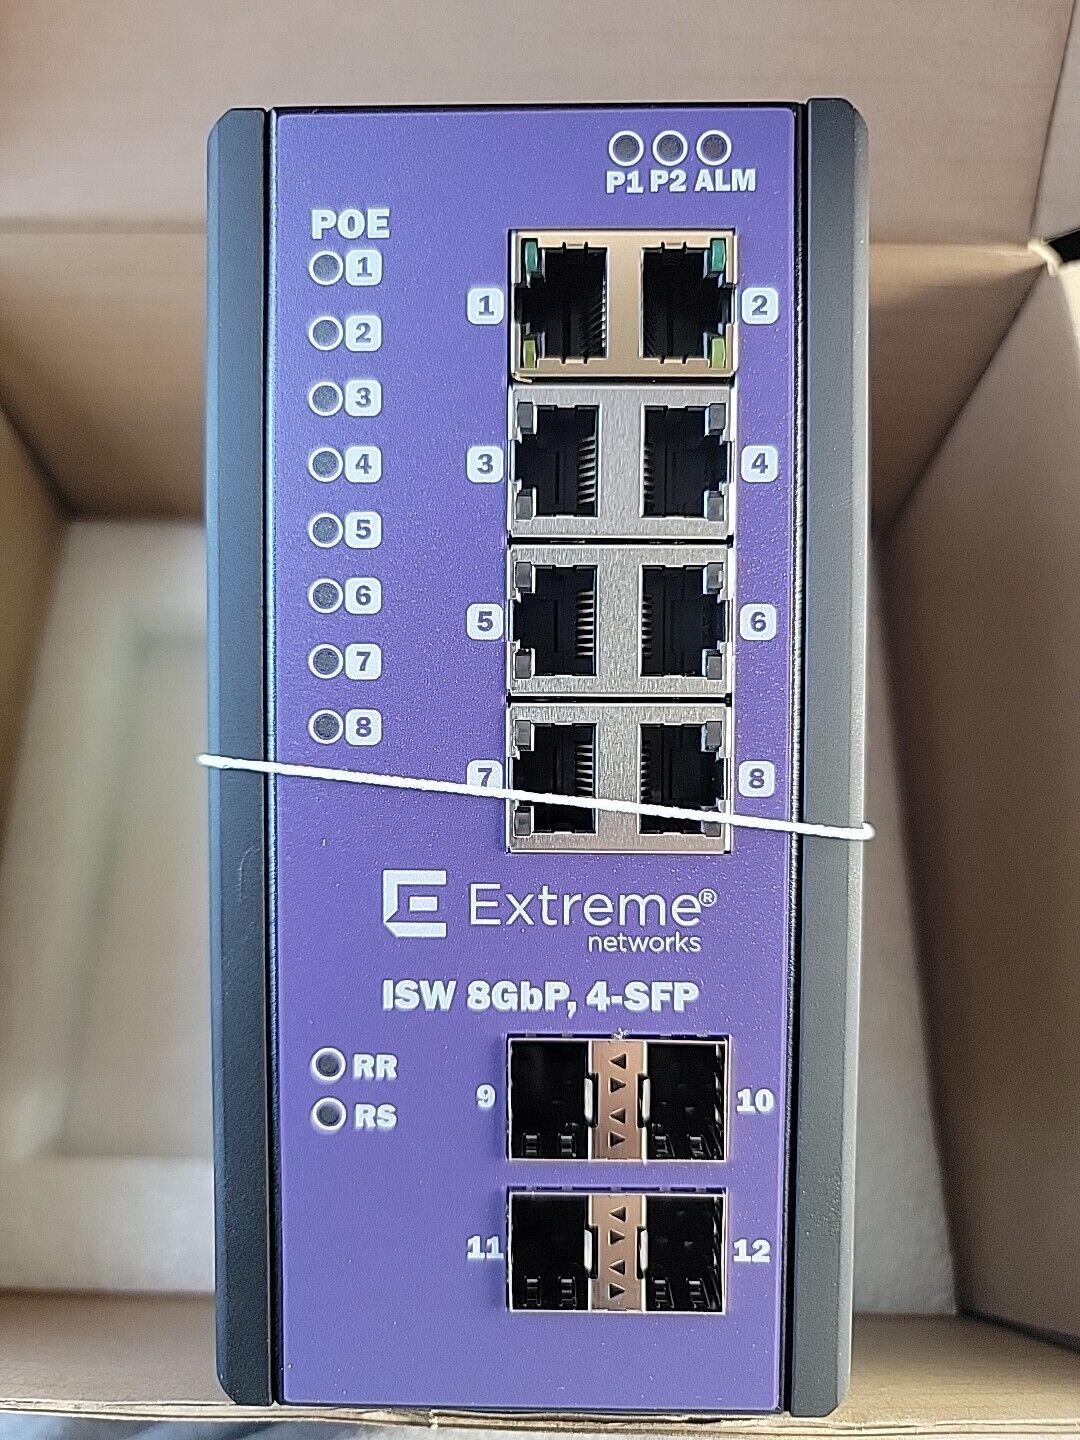 Extreme Networks - 16804 - Extreme Networks ISW 8GBP,4-SFP Ethernet Switch - 8 P